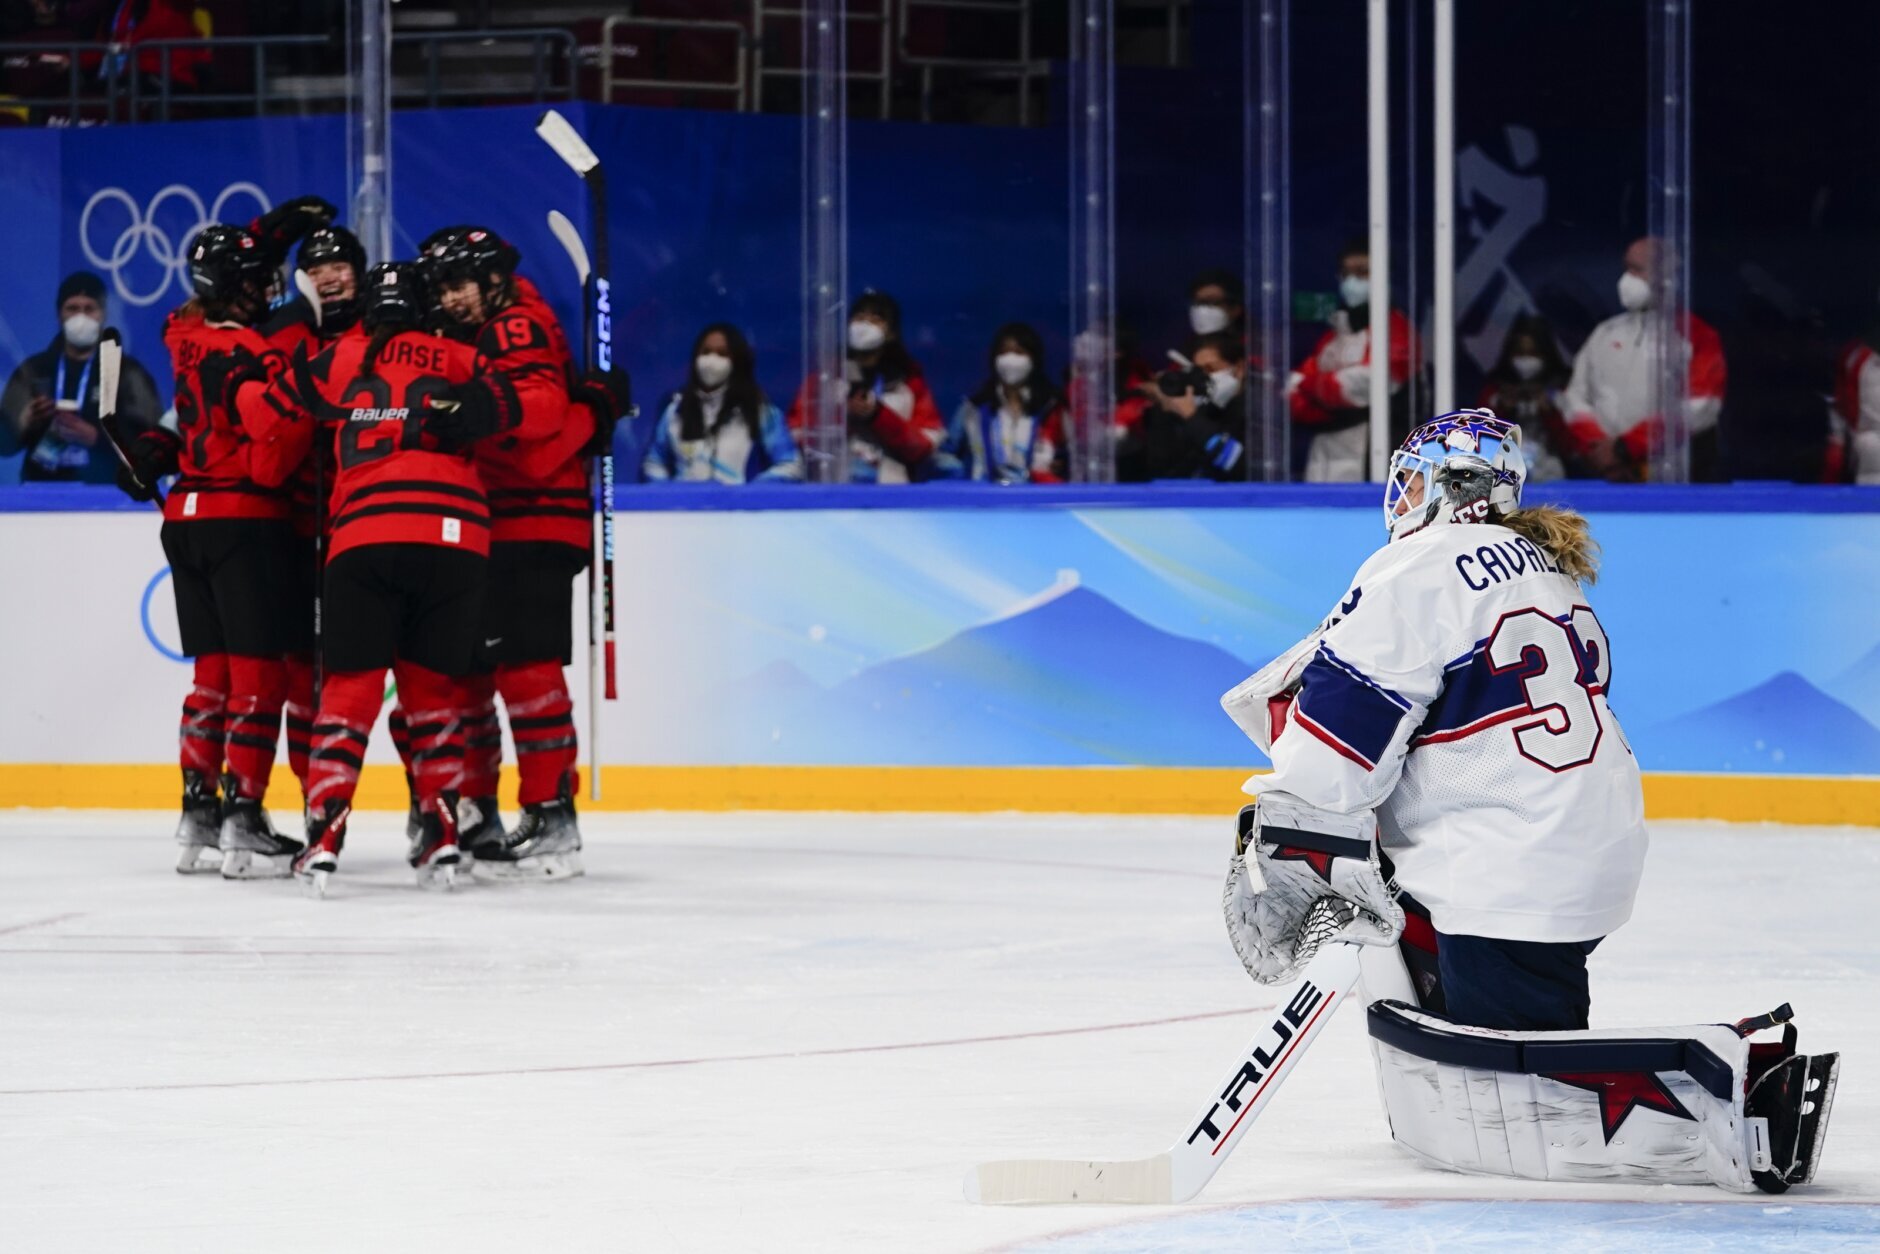 Olympic goalie puts gold medal up for auction